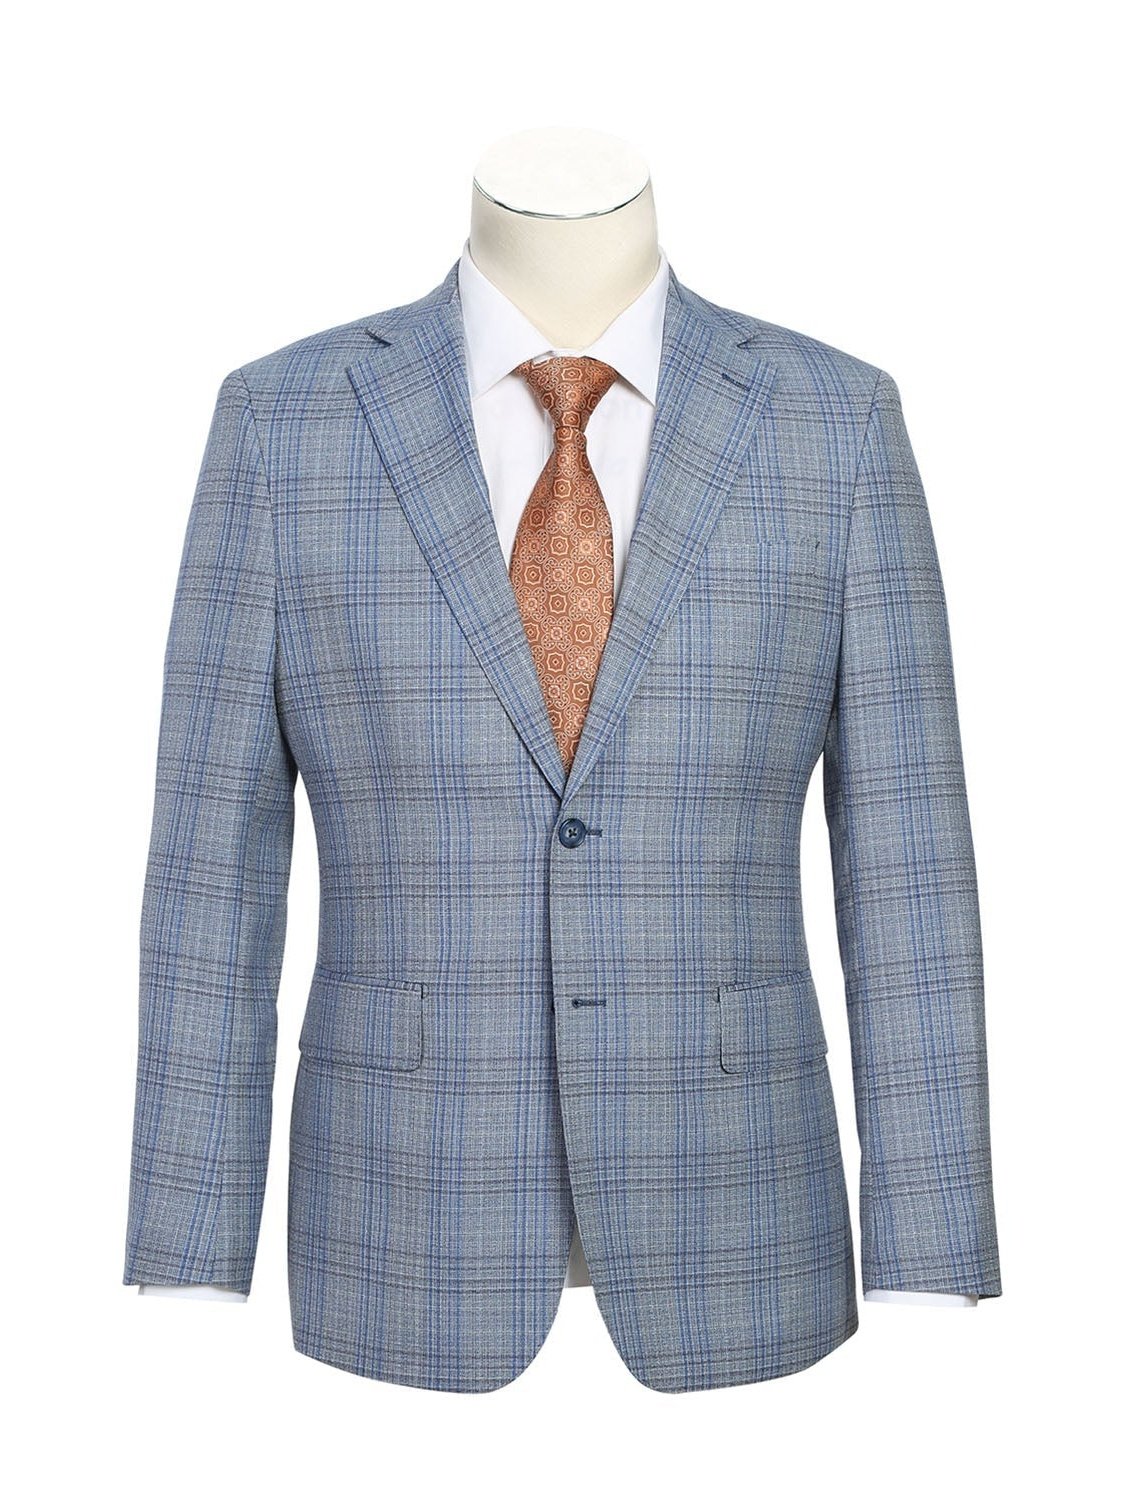 English Laundry Slim Fit Light Gray with Blue Check Wool Suit